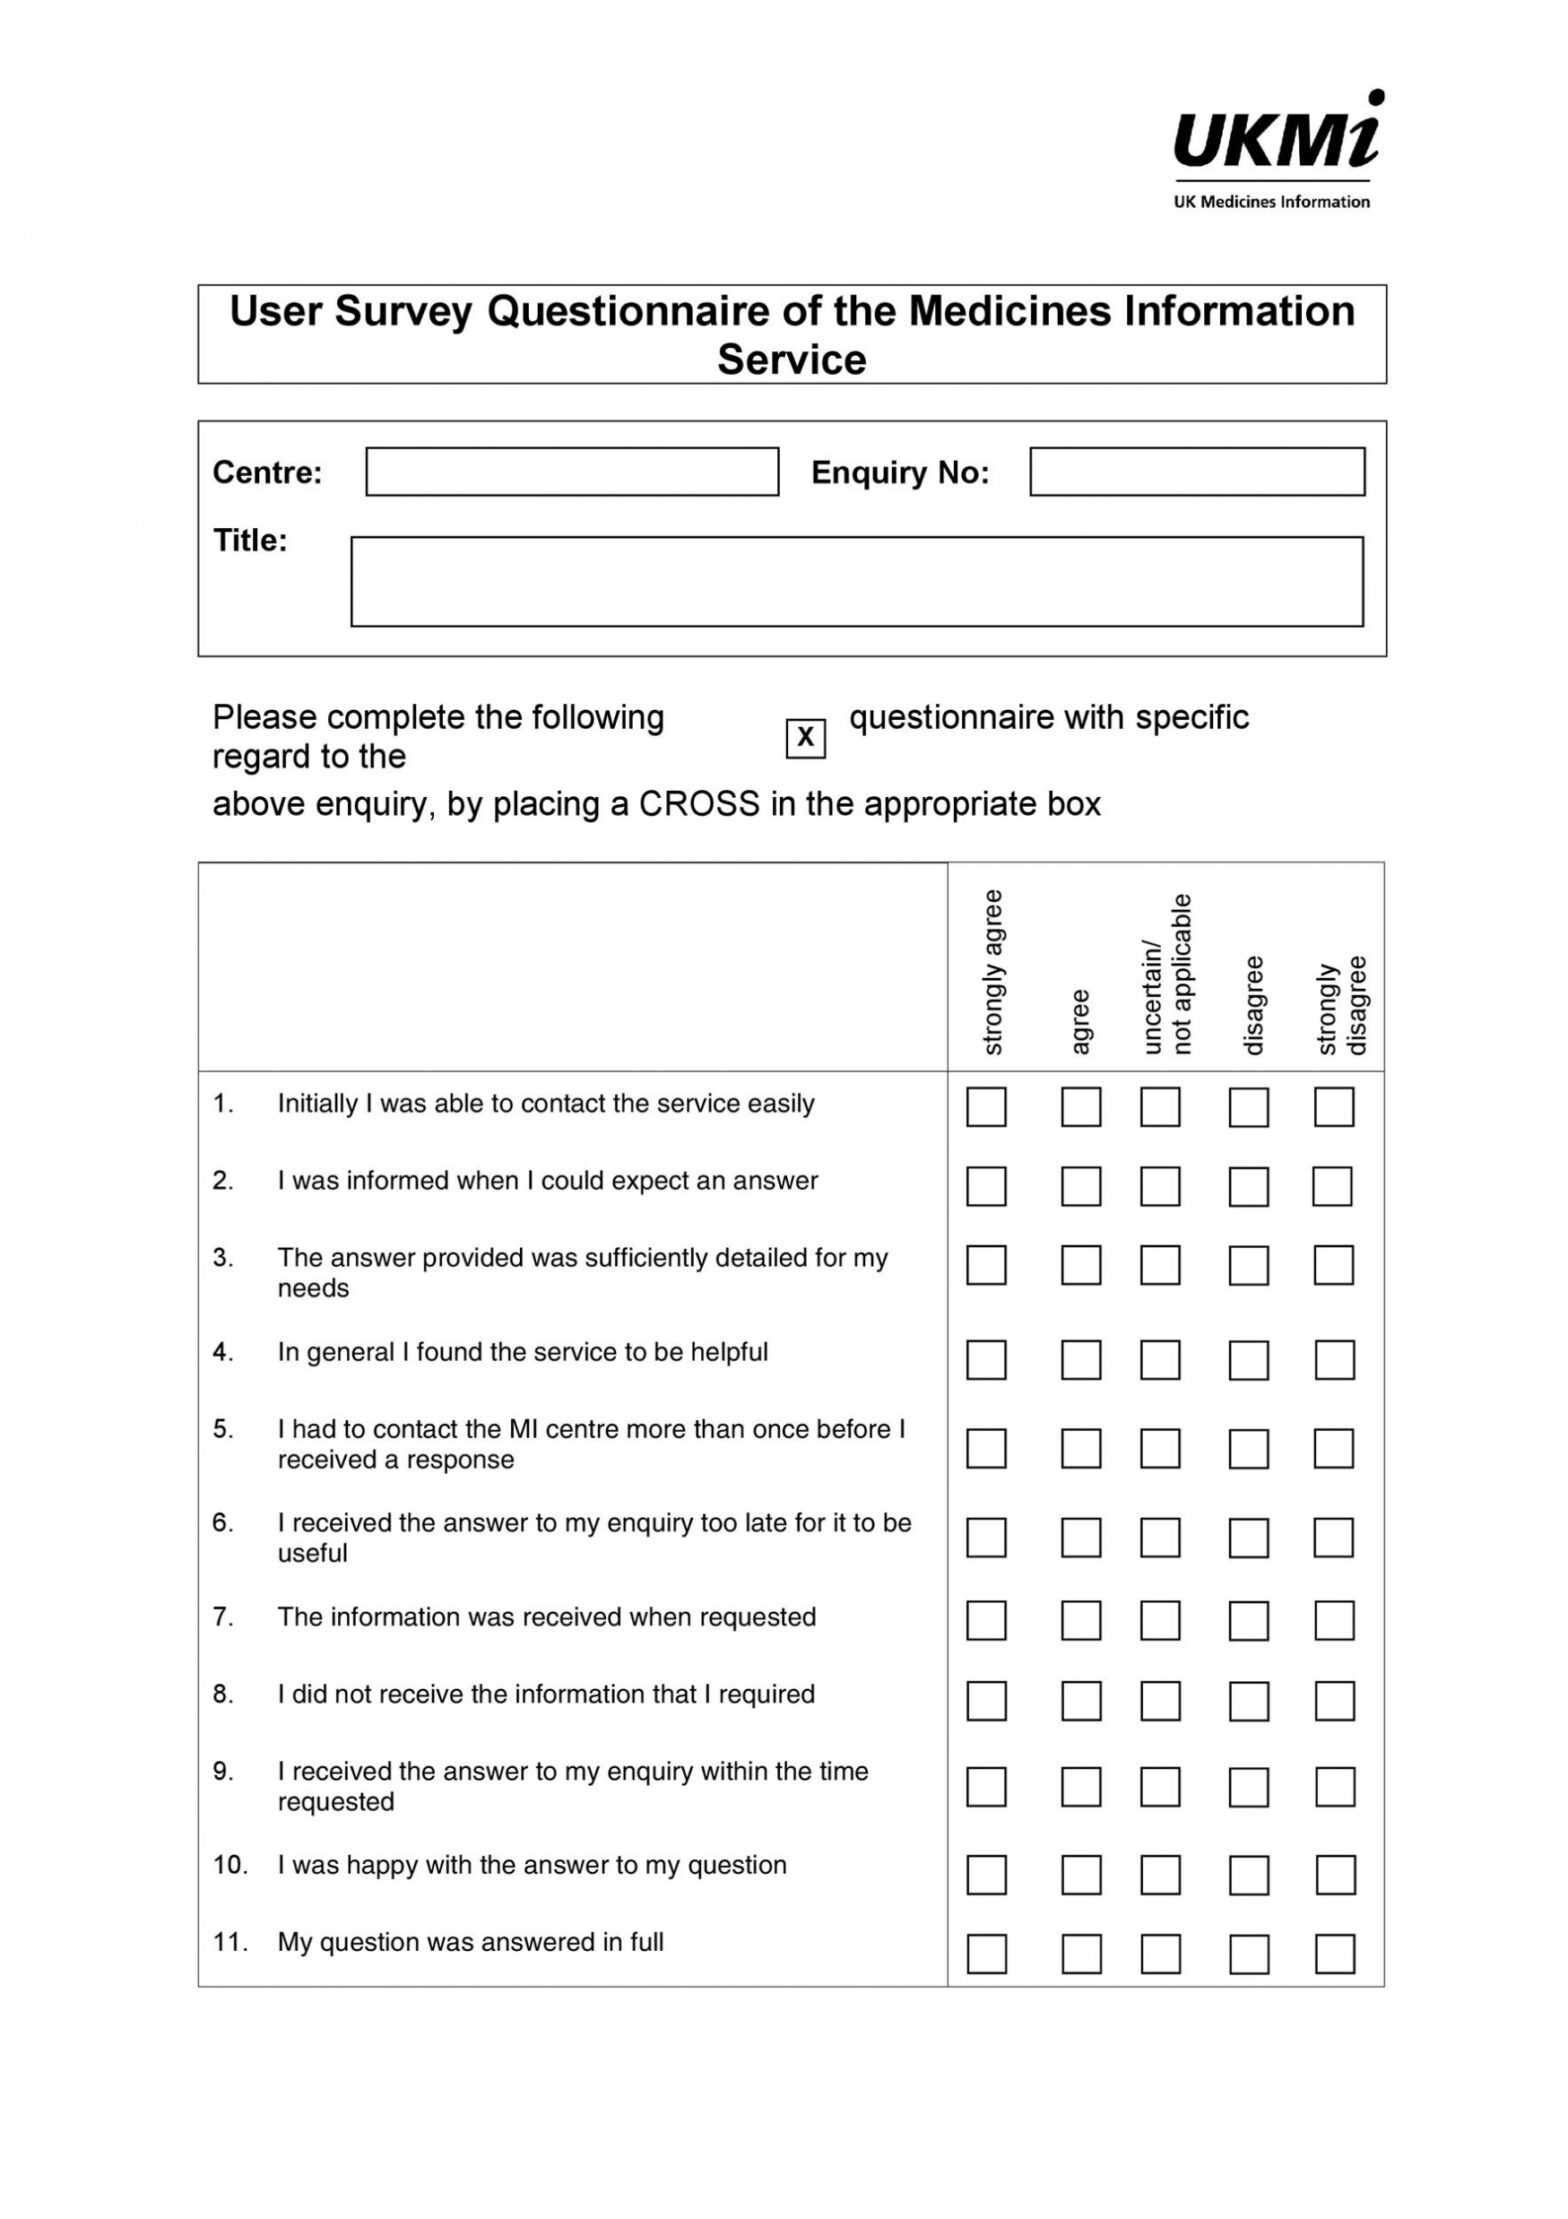 30+ Questionnaire Templates (Word) ᐅ Templatelab throughout Questionnaire Design Template Word